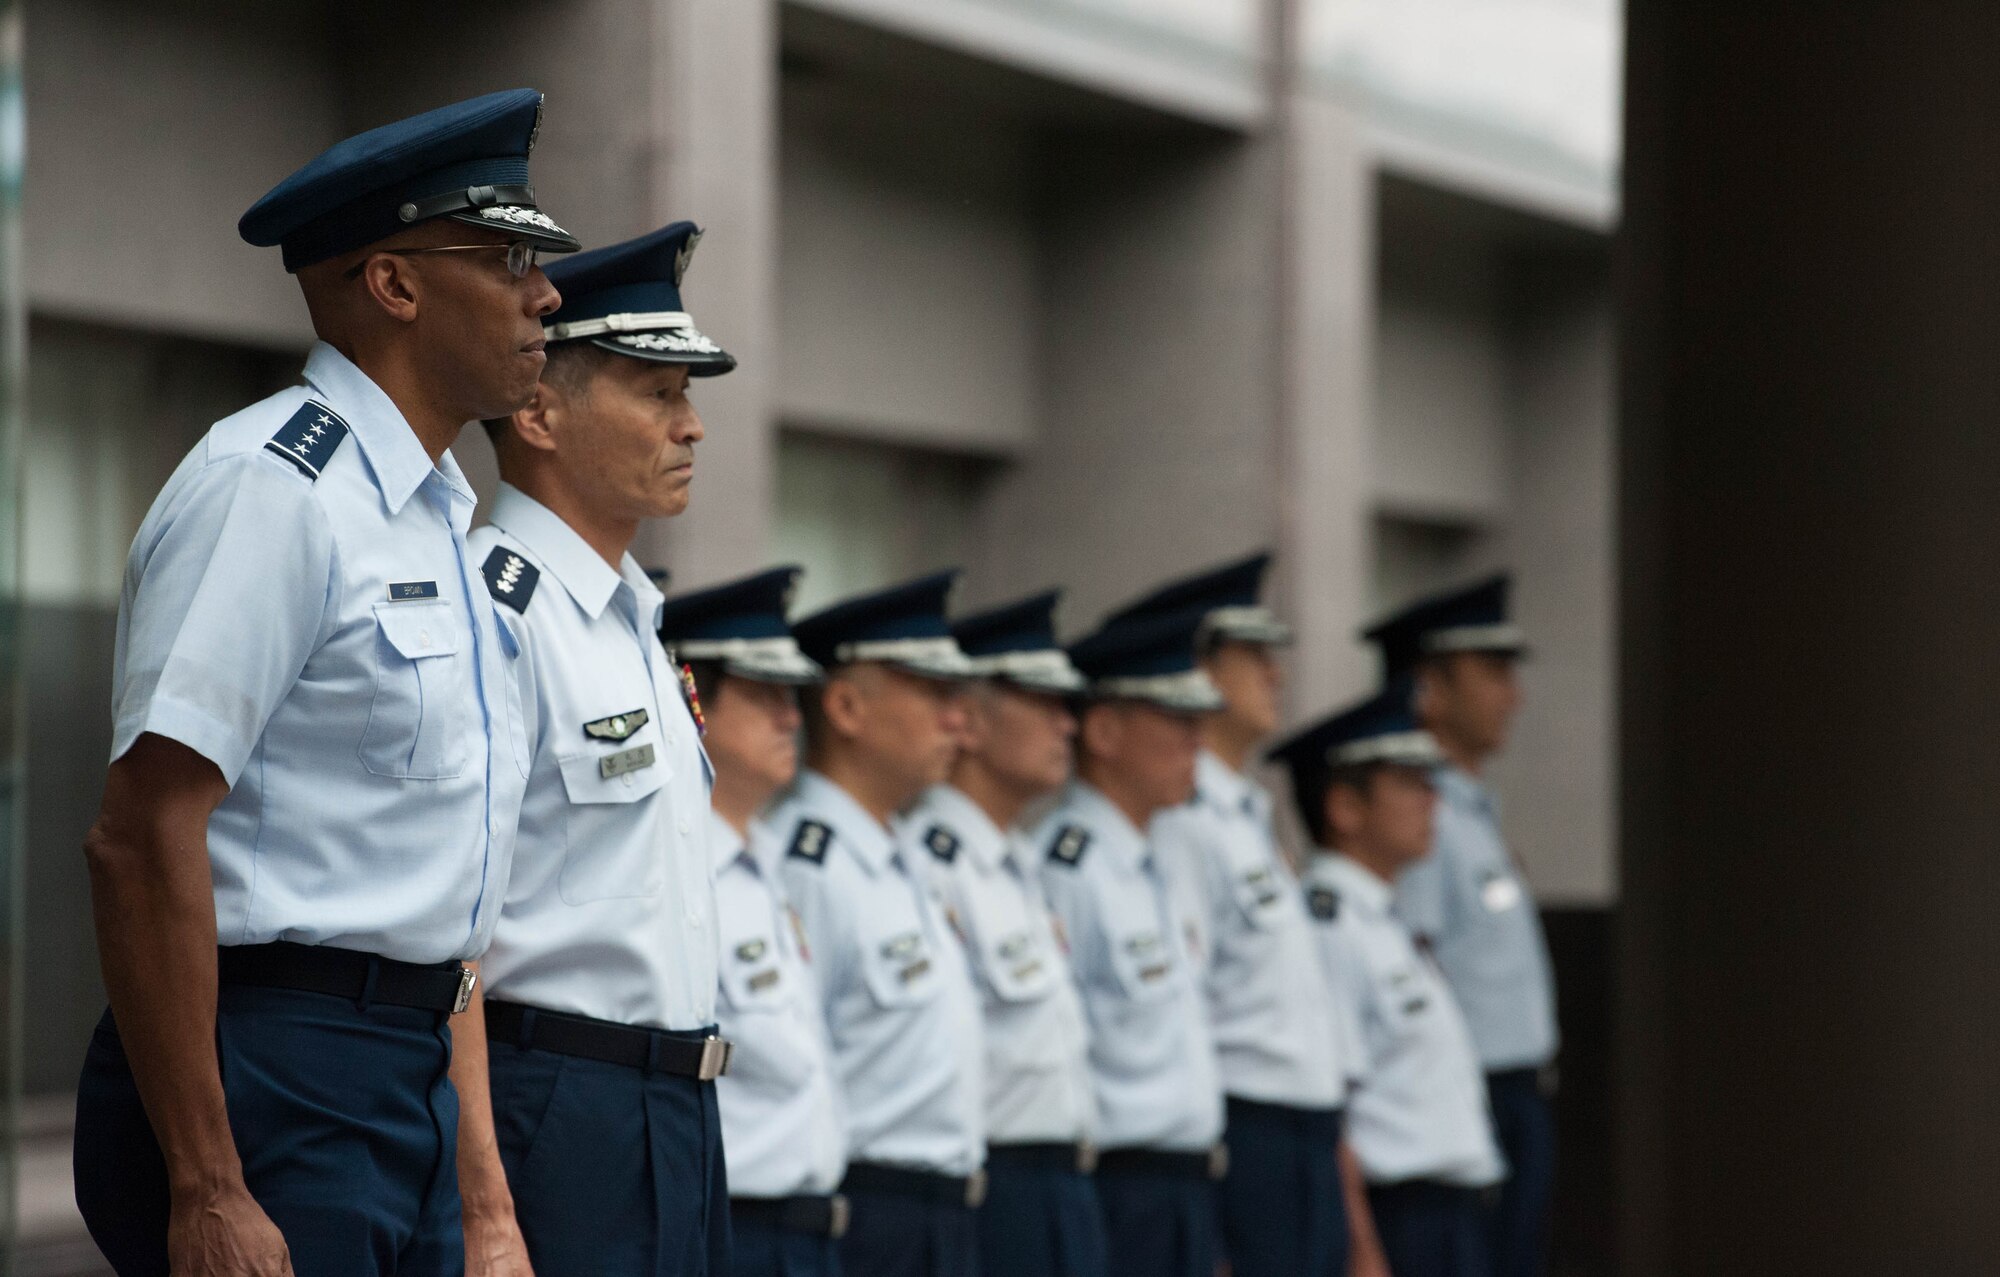 Gen. CQ Brown, Jr., Pacific Air Forces commander, and Gen. Yoshinari Marumo, Chief of Staff, Koku-Jietai (Japan Air Self Defense Force), prepare for an honor guard ceremony at the Ministry of Defense in Tokyo, Japan, Aug. 7, 2018. Brown visited the country to affirm the United States' shared commitment to a free and open Indo-Pacific as well as to seek opportunities to enhance cooperation and coordination across the alliance. For more than 60 years, the U.S.-Japan alliance has been the cornerstone for stability and security in the region. (U.S. Air Force photo by Hailey Haux)